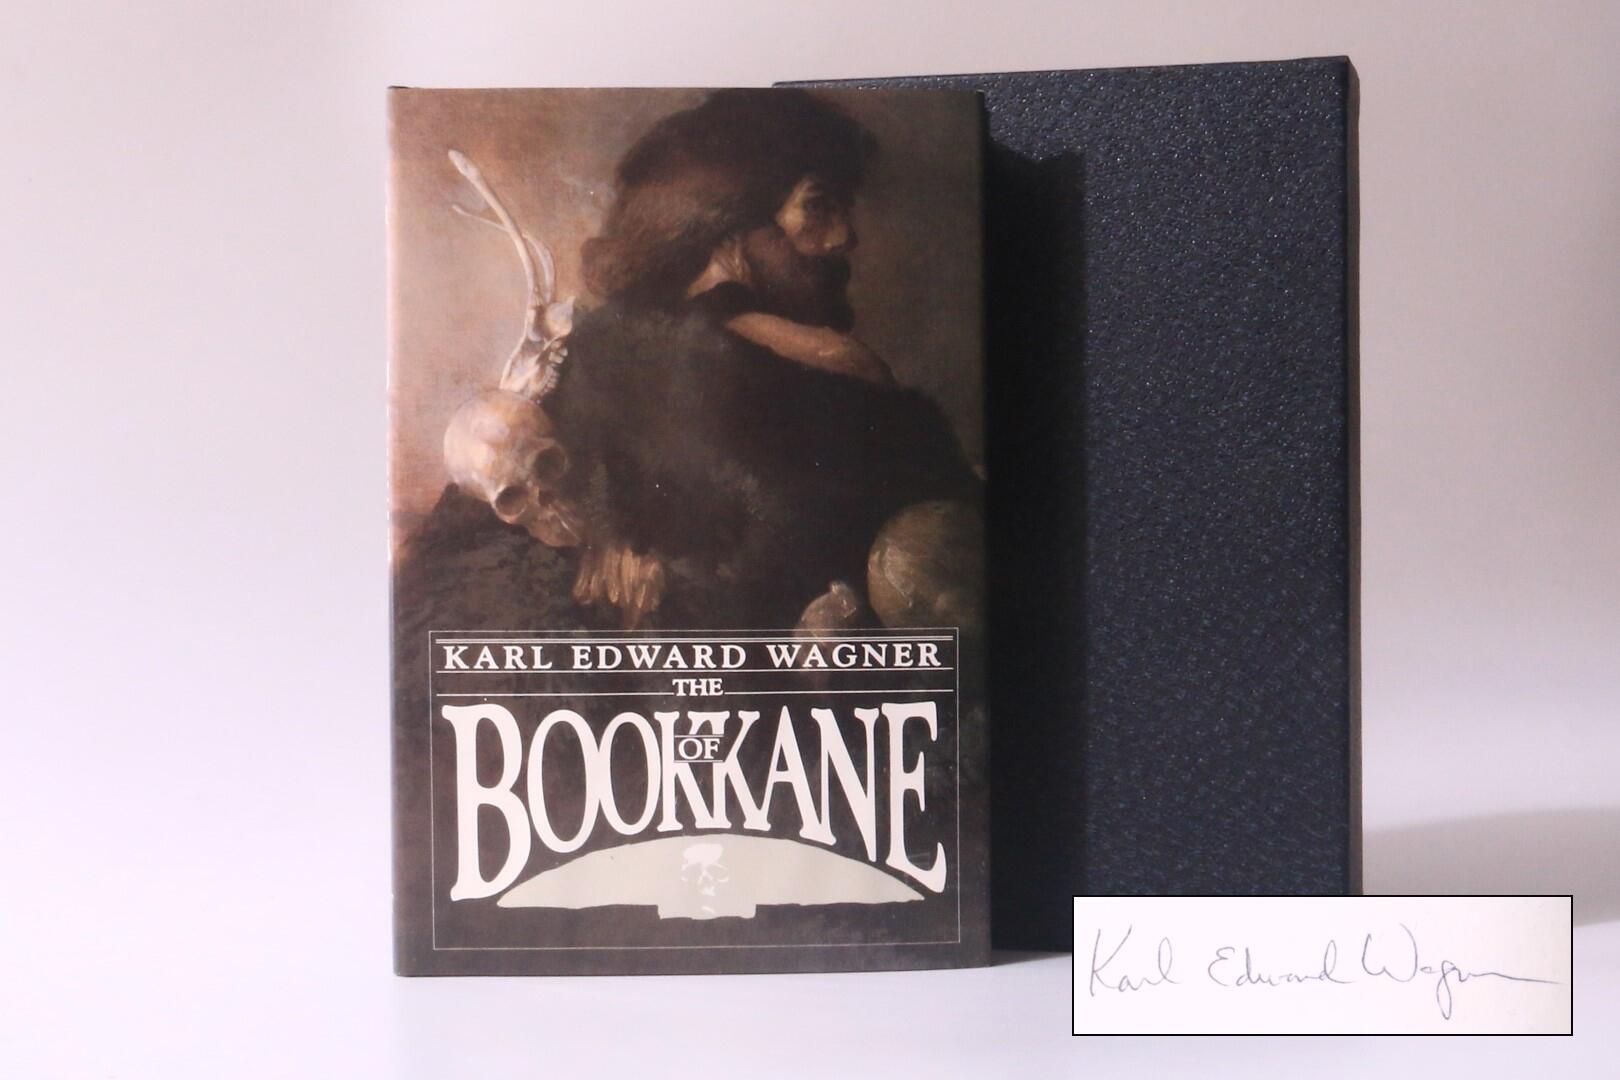 Karl Edward Wagner - The Book of Kane - Grant, 1985, Signed Limited Edition.